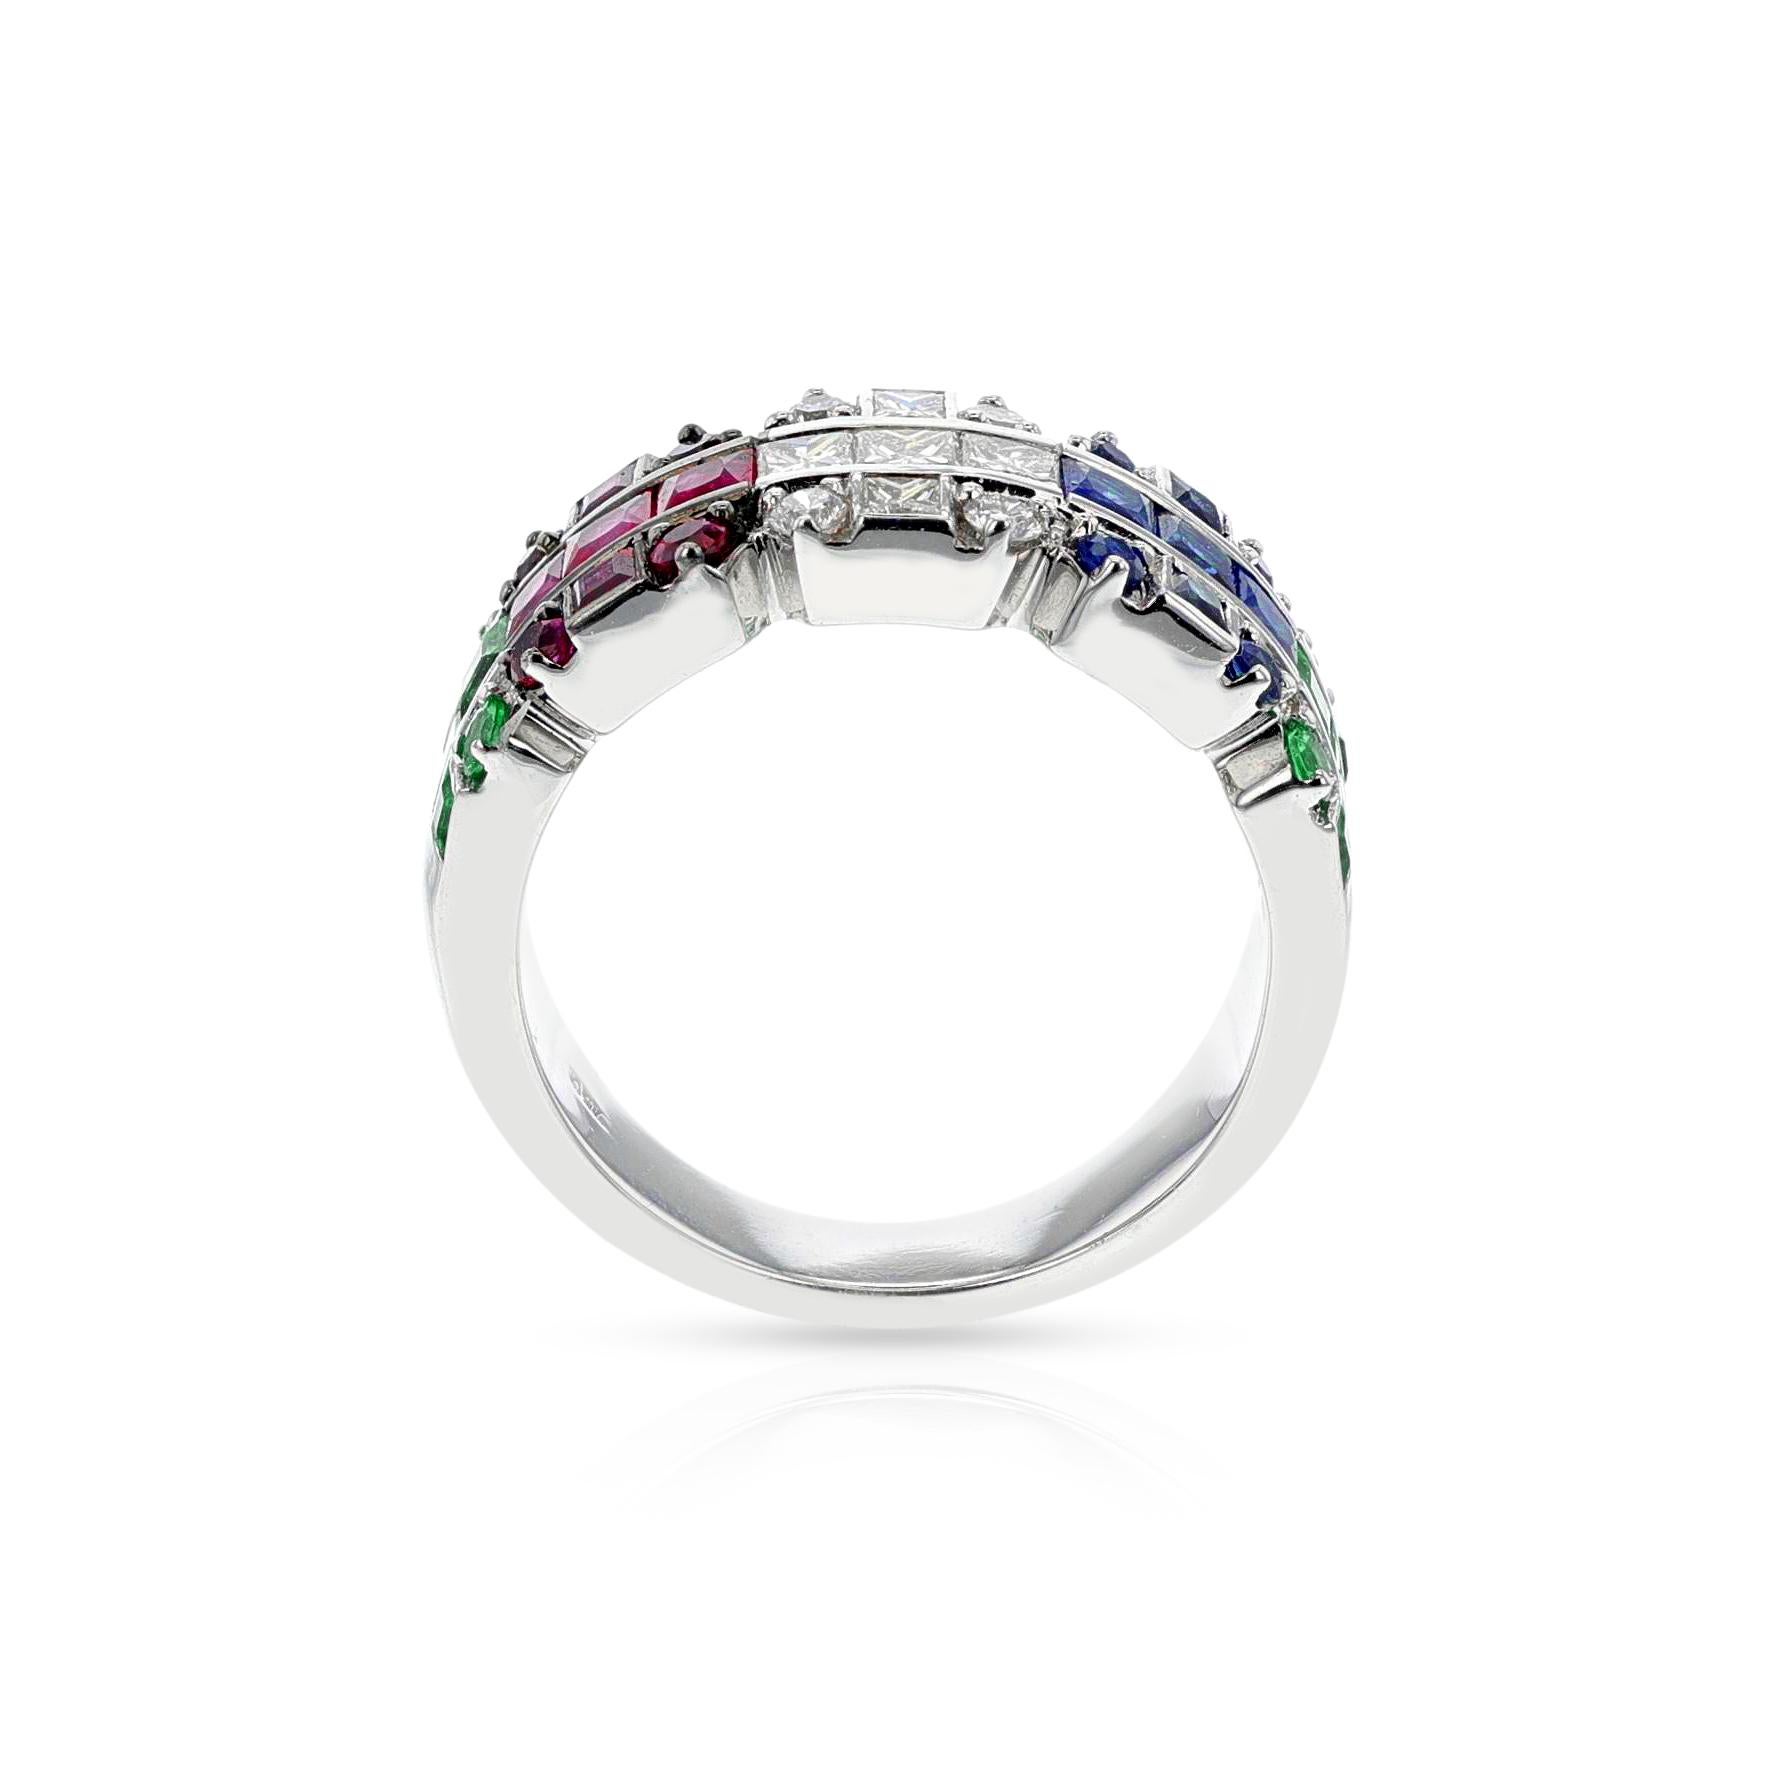 This exquisite Diamond, Emerald, Ruby, Sapphire Ring is crafted with 18k White Gold. Set with a total weight of 7.27 grams, this magnificent ring is a US size 6. Enjoy the beauty of timeless design with this striking piece of jewelry.